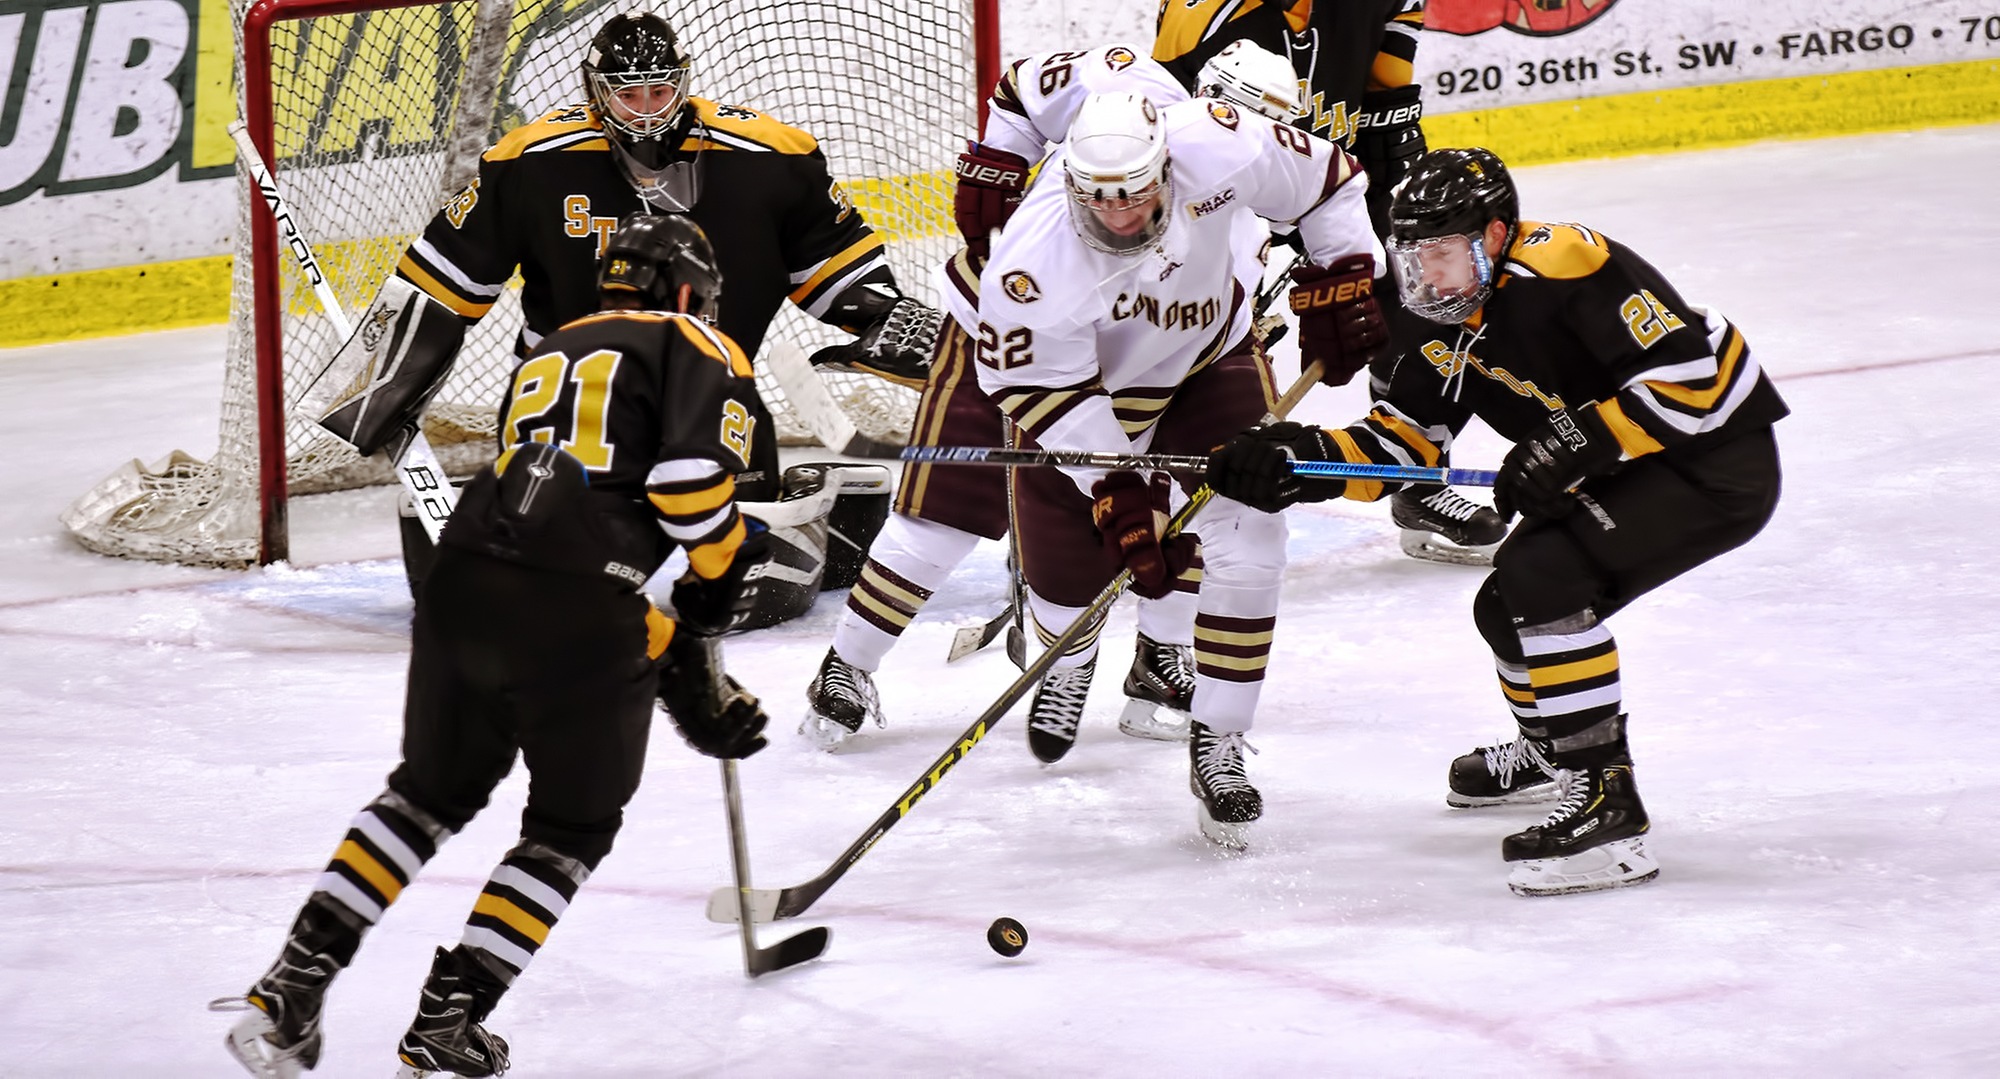 Senior Eddie Eades had the game-winning goal in the Cobbers' playoff-clinching 2-1 win at St. Olaf.